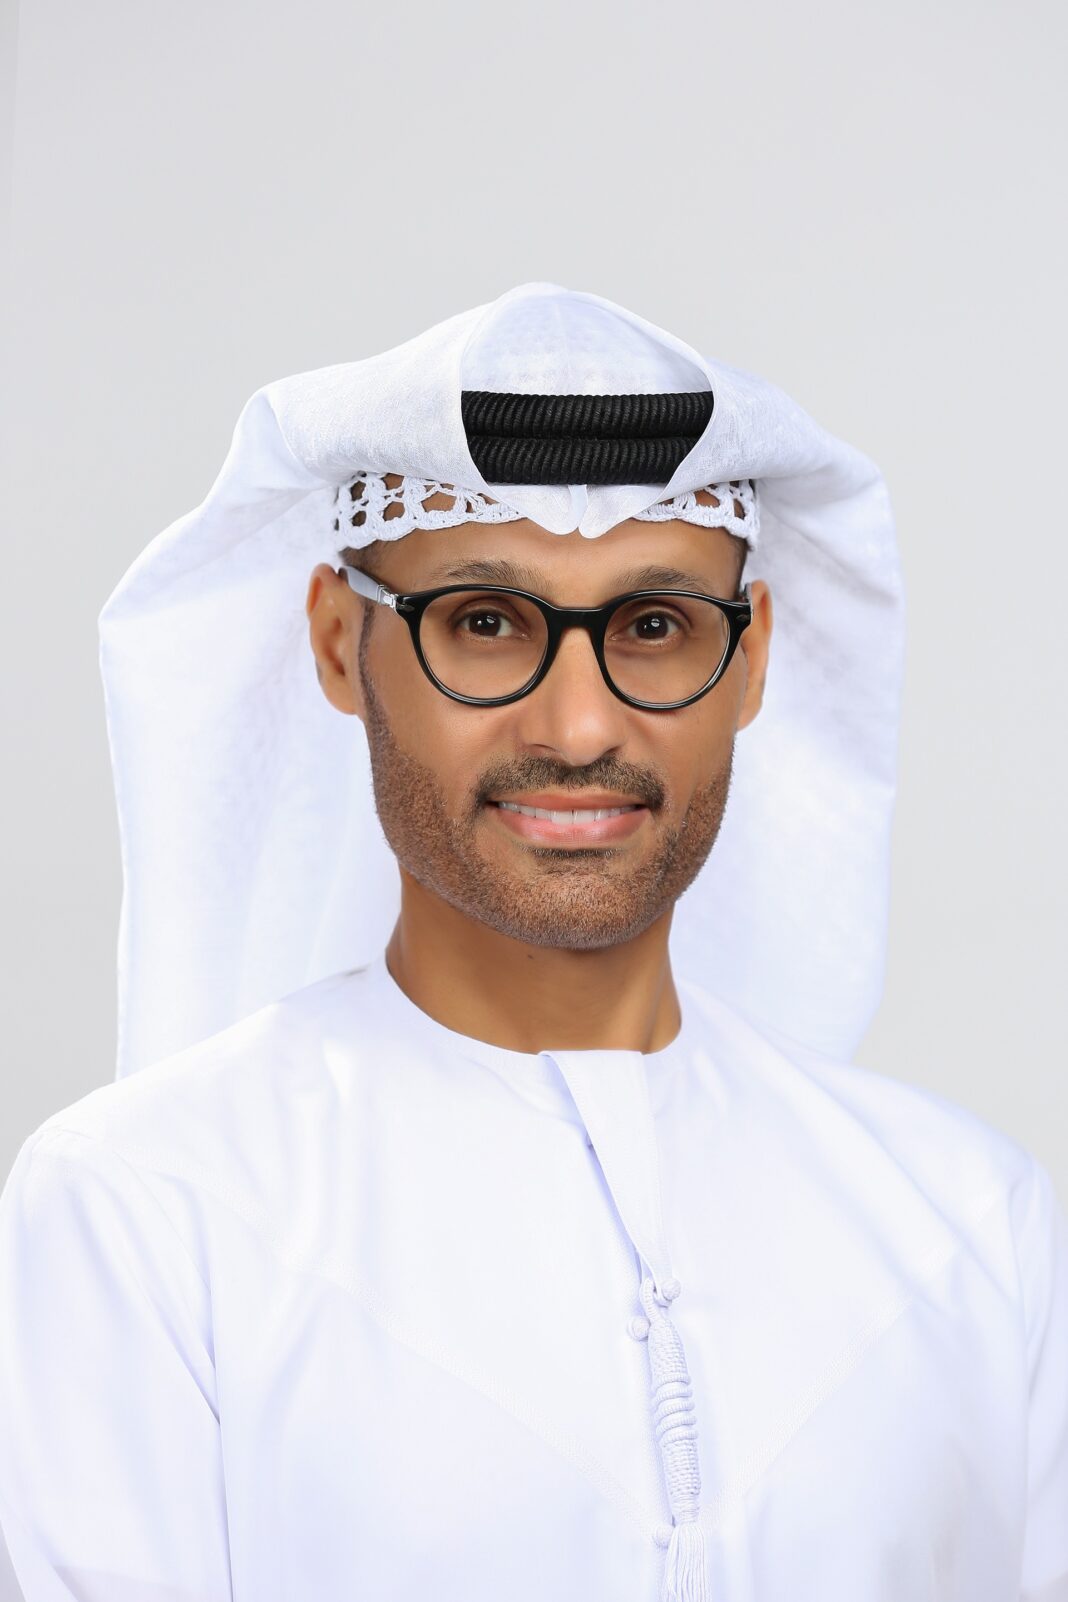 H.E. Dr. Mohamed Hamad Al-Kuwaiti, Head of Cyber Security, UAE Government